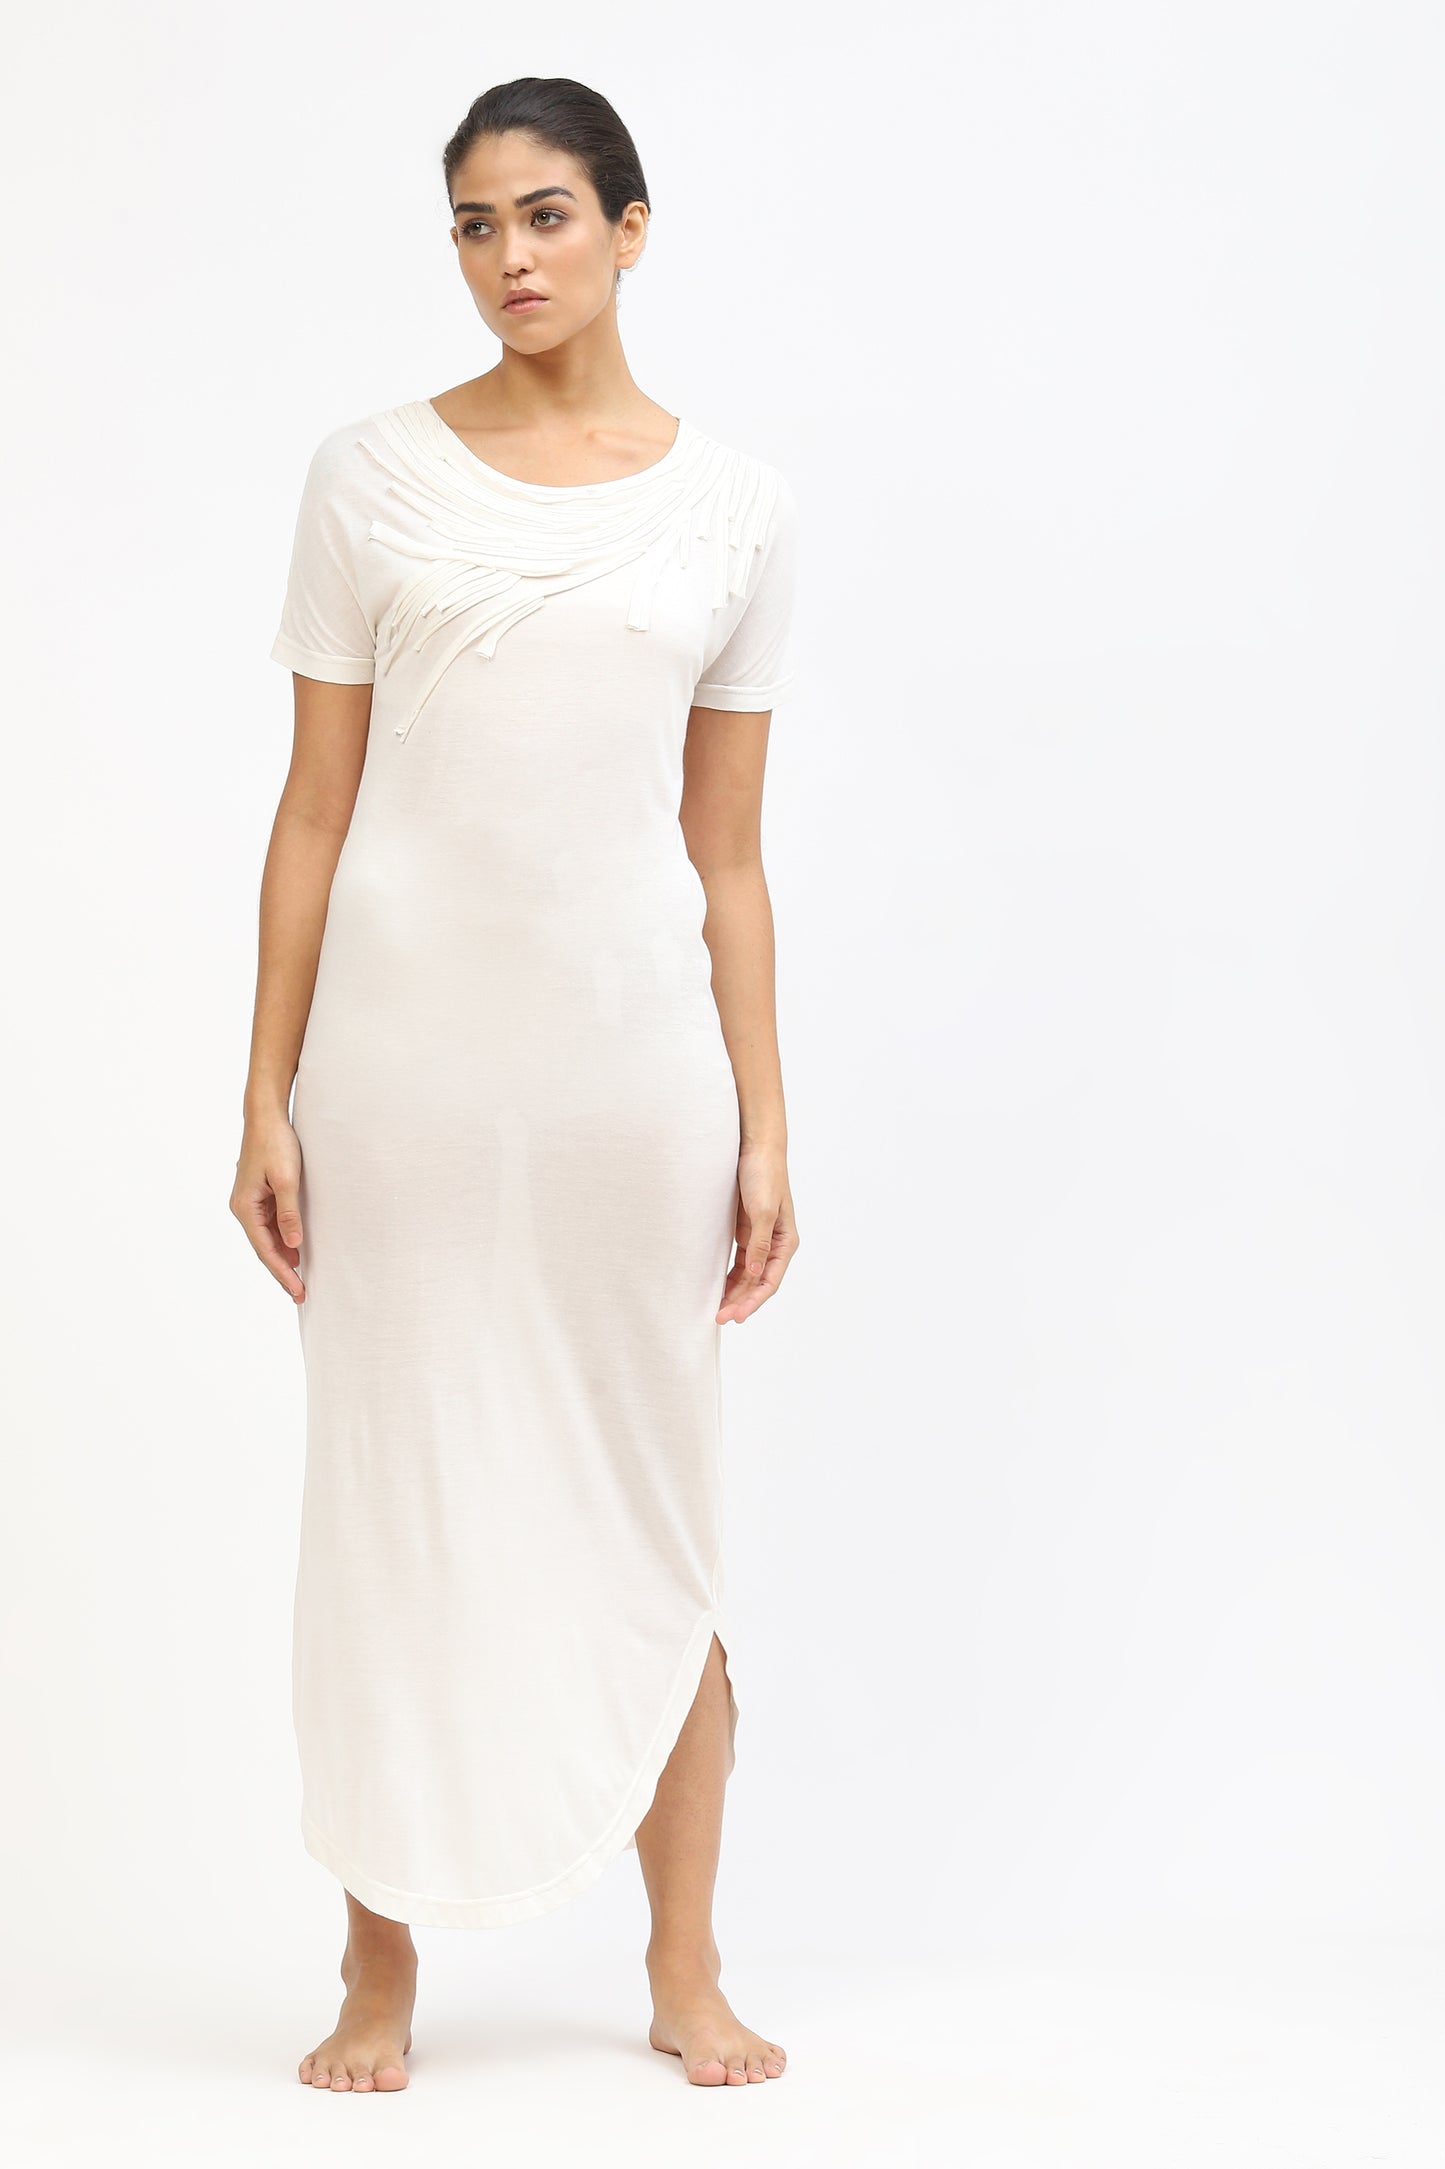 Womens Long White Cotton Dress With Fabric Embroidery And Round Hem